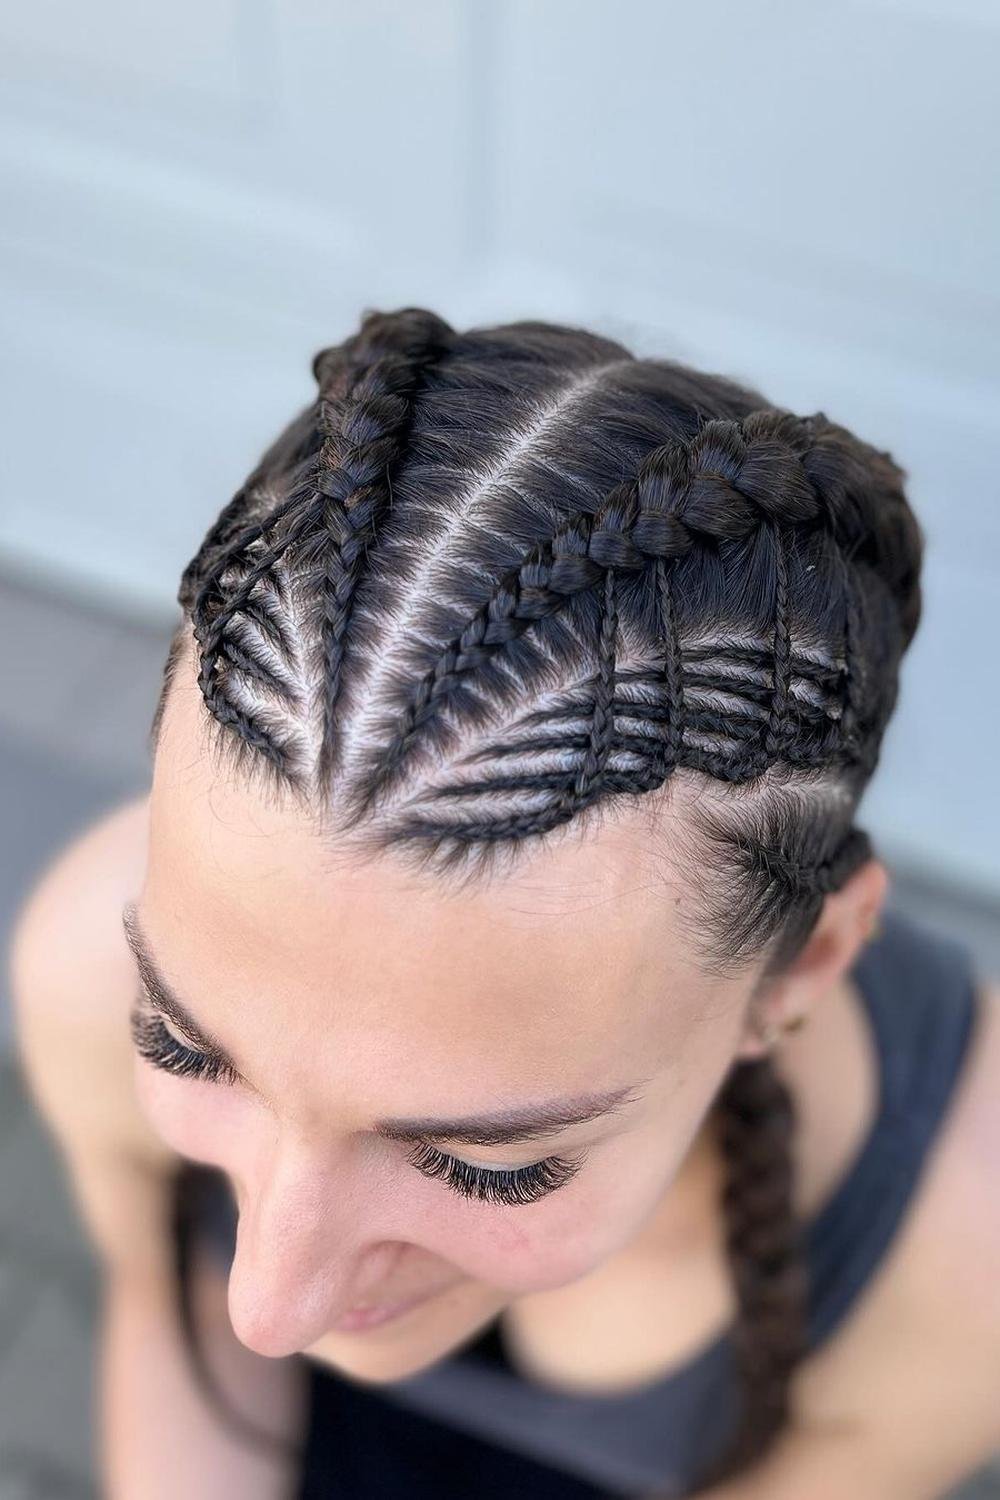 14 - Picture of Braided Hairstyles